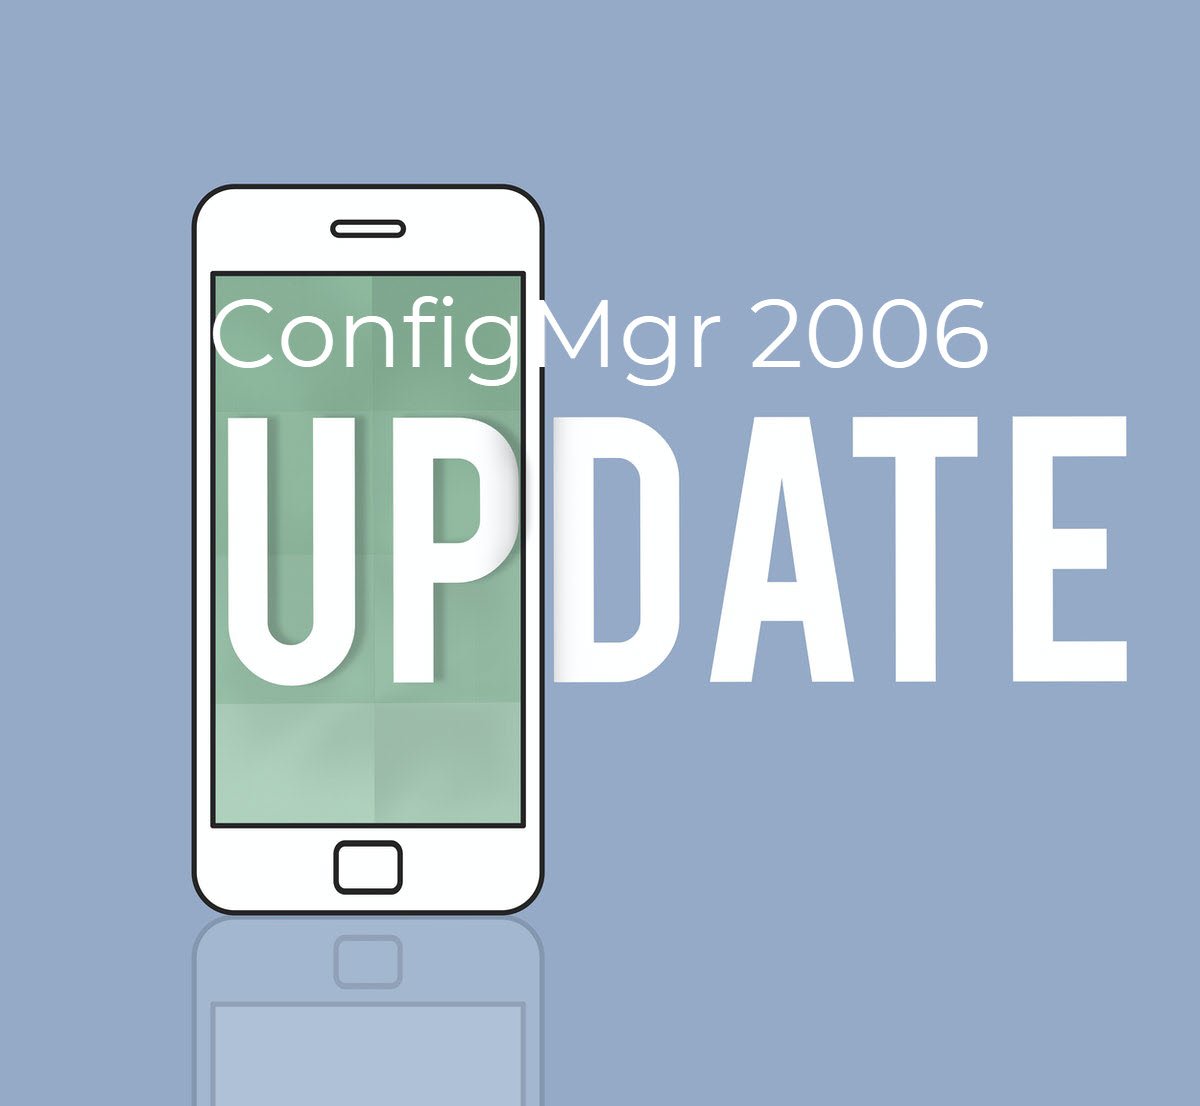 Configuration Manager 2006 Generally Available - Prajwal Desai